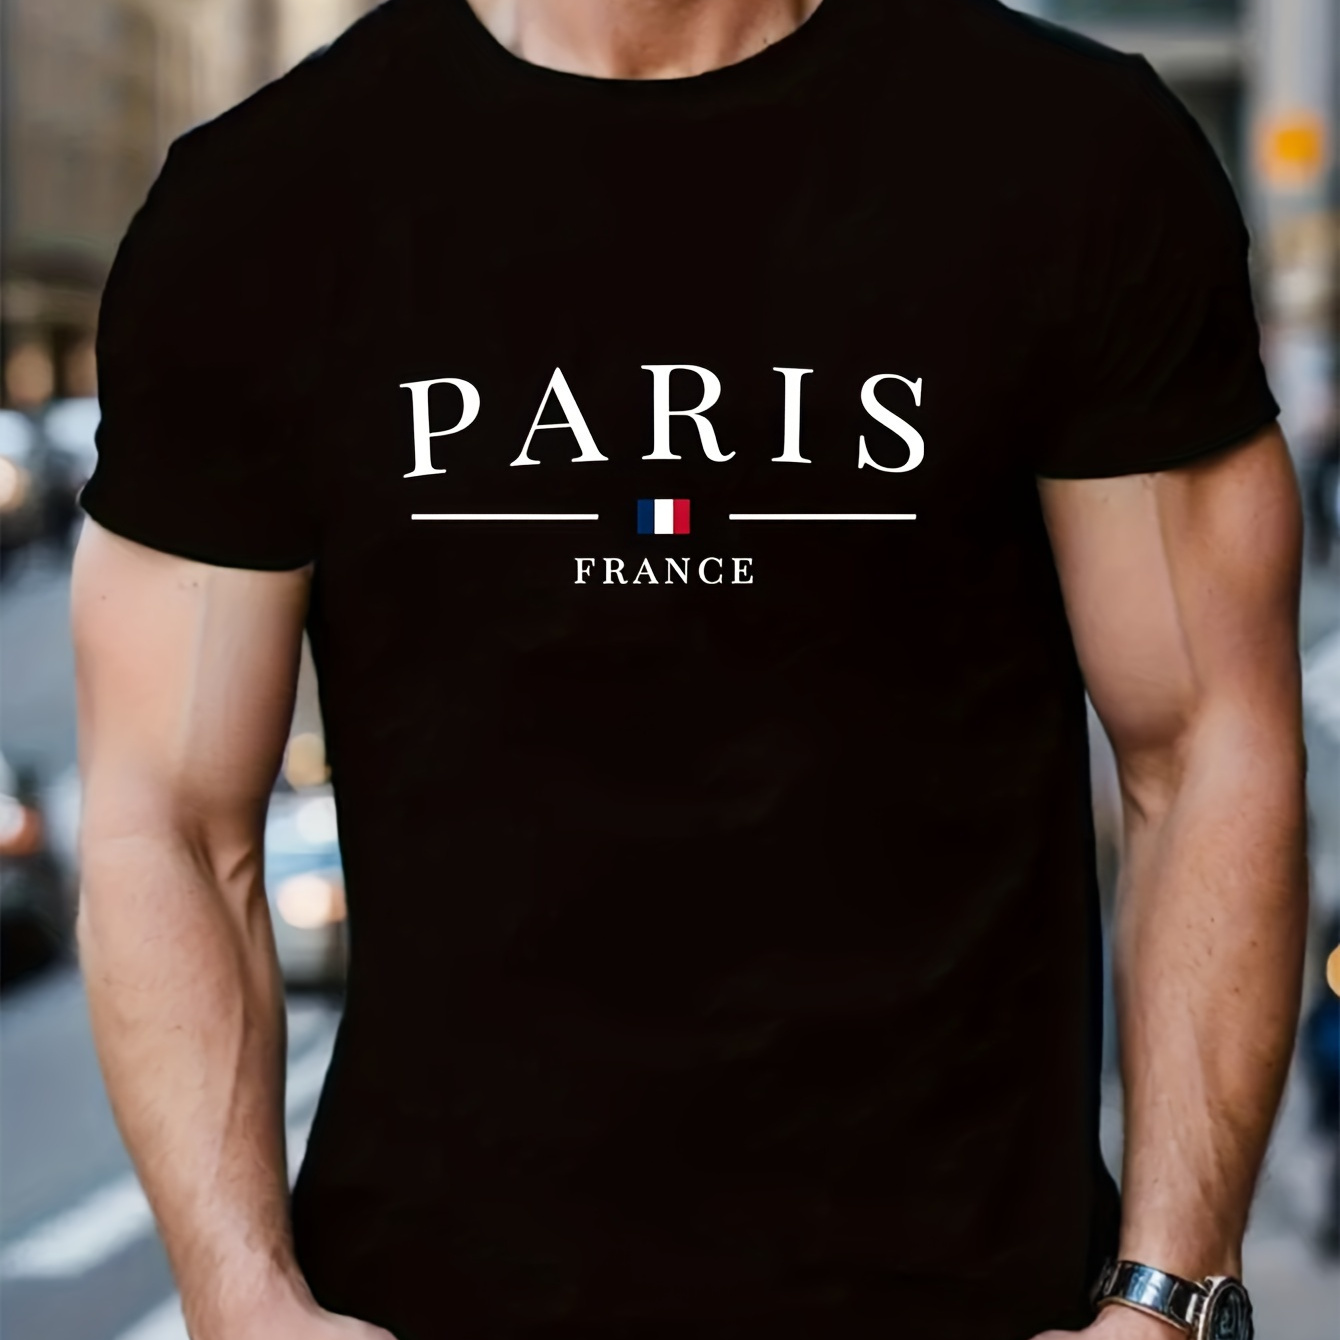 

Paris France Print, Men's Round Crew Neck Short Sleeve Tee, Casual T-shirt, Casual Comfy Lightweight Top For Summer